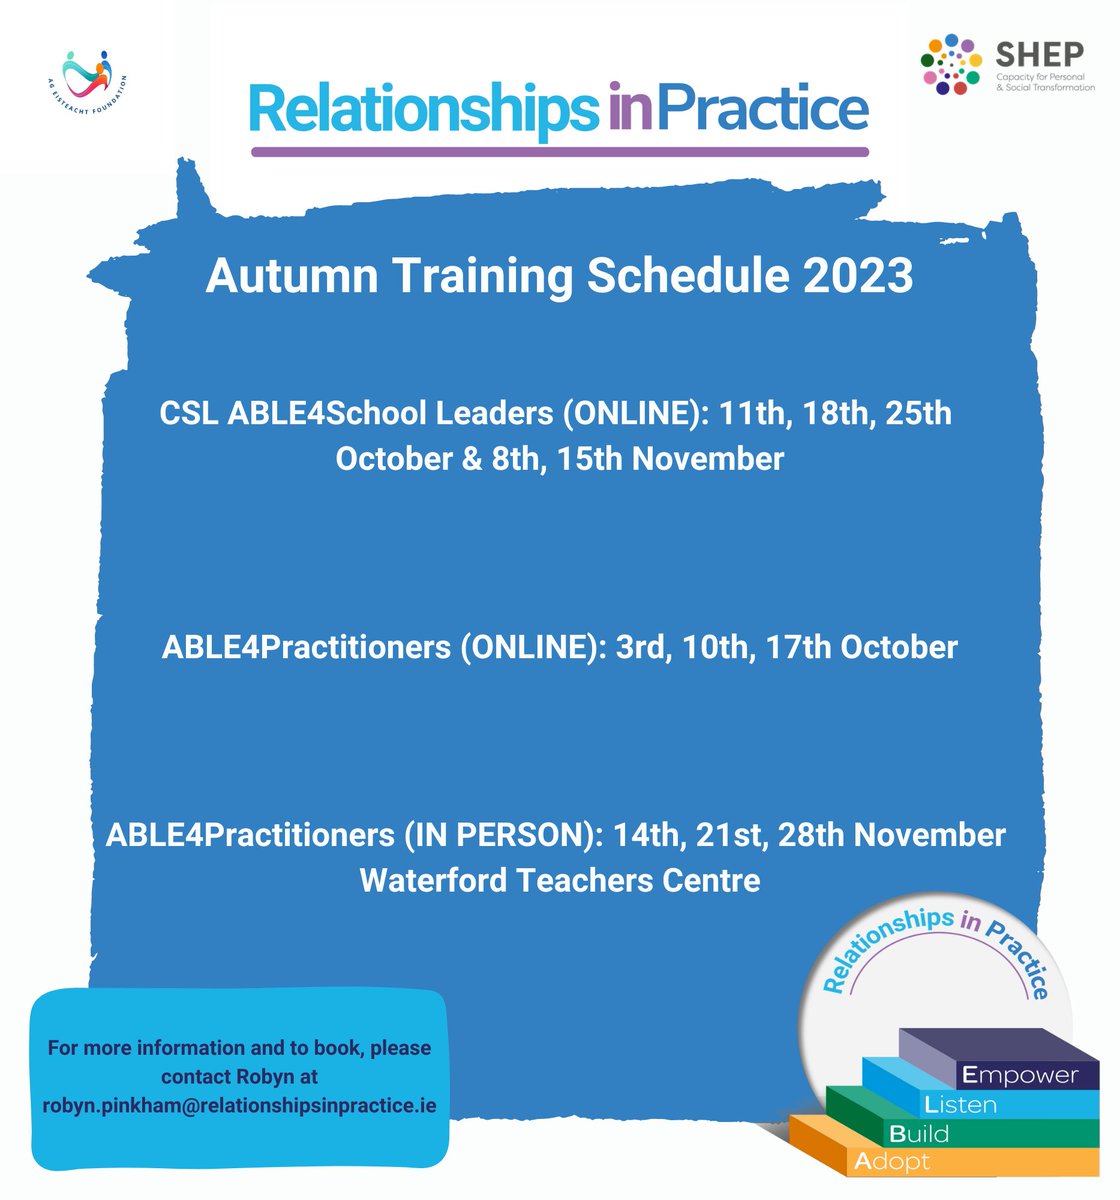 We are delighted to offer our #ABLE4School_Leaders and #ABLE4Practitioners training this autumn. Enhance your #communication and #relational skills with your students, patients and colleagues, and the learn importance of building #quality_relationships #RelationshipsMatter